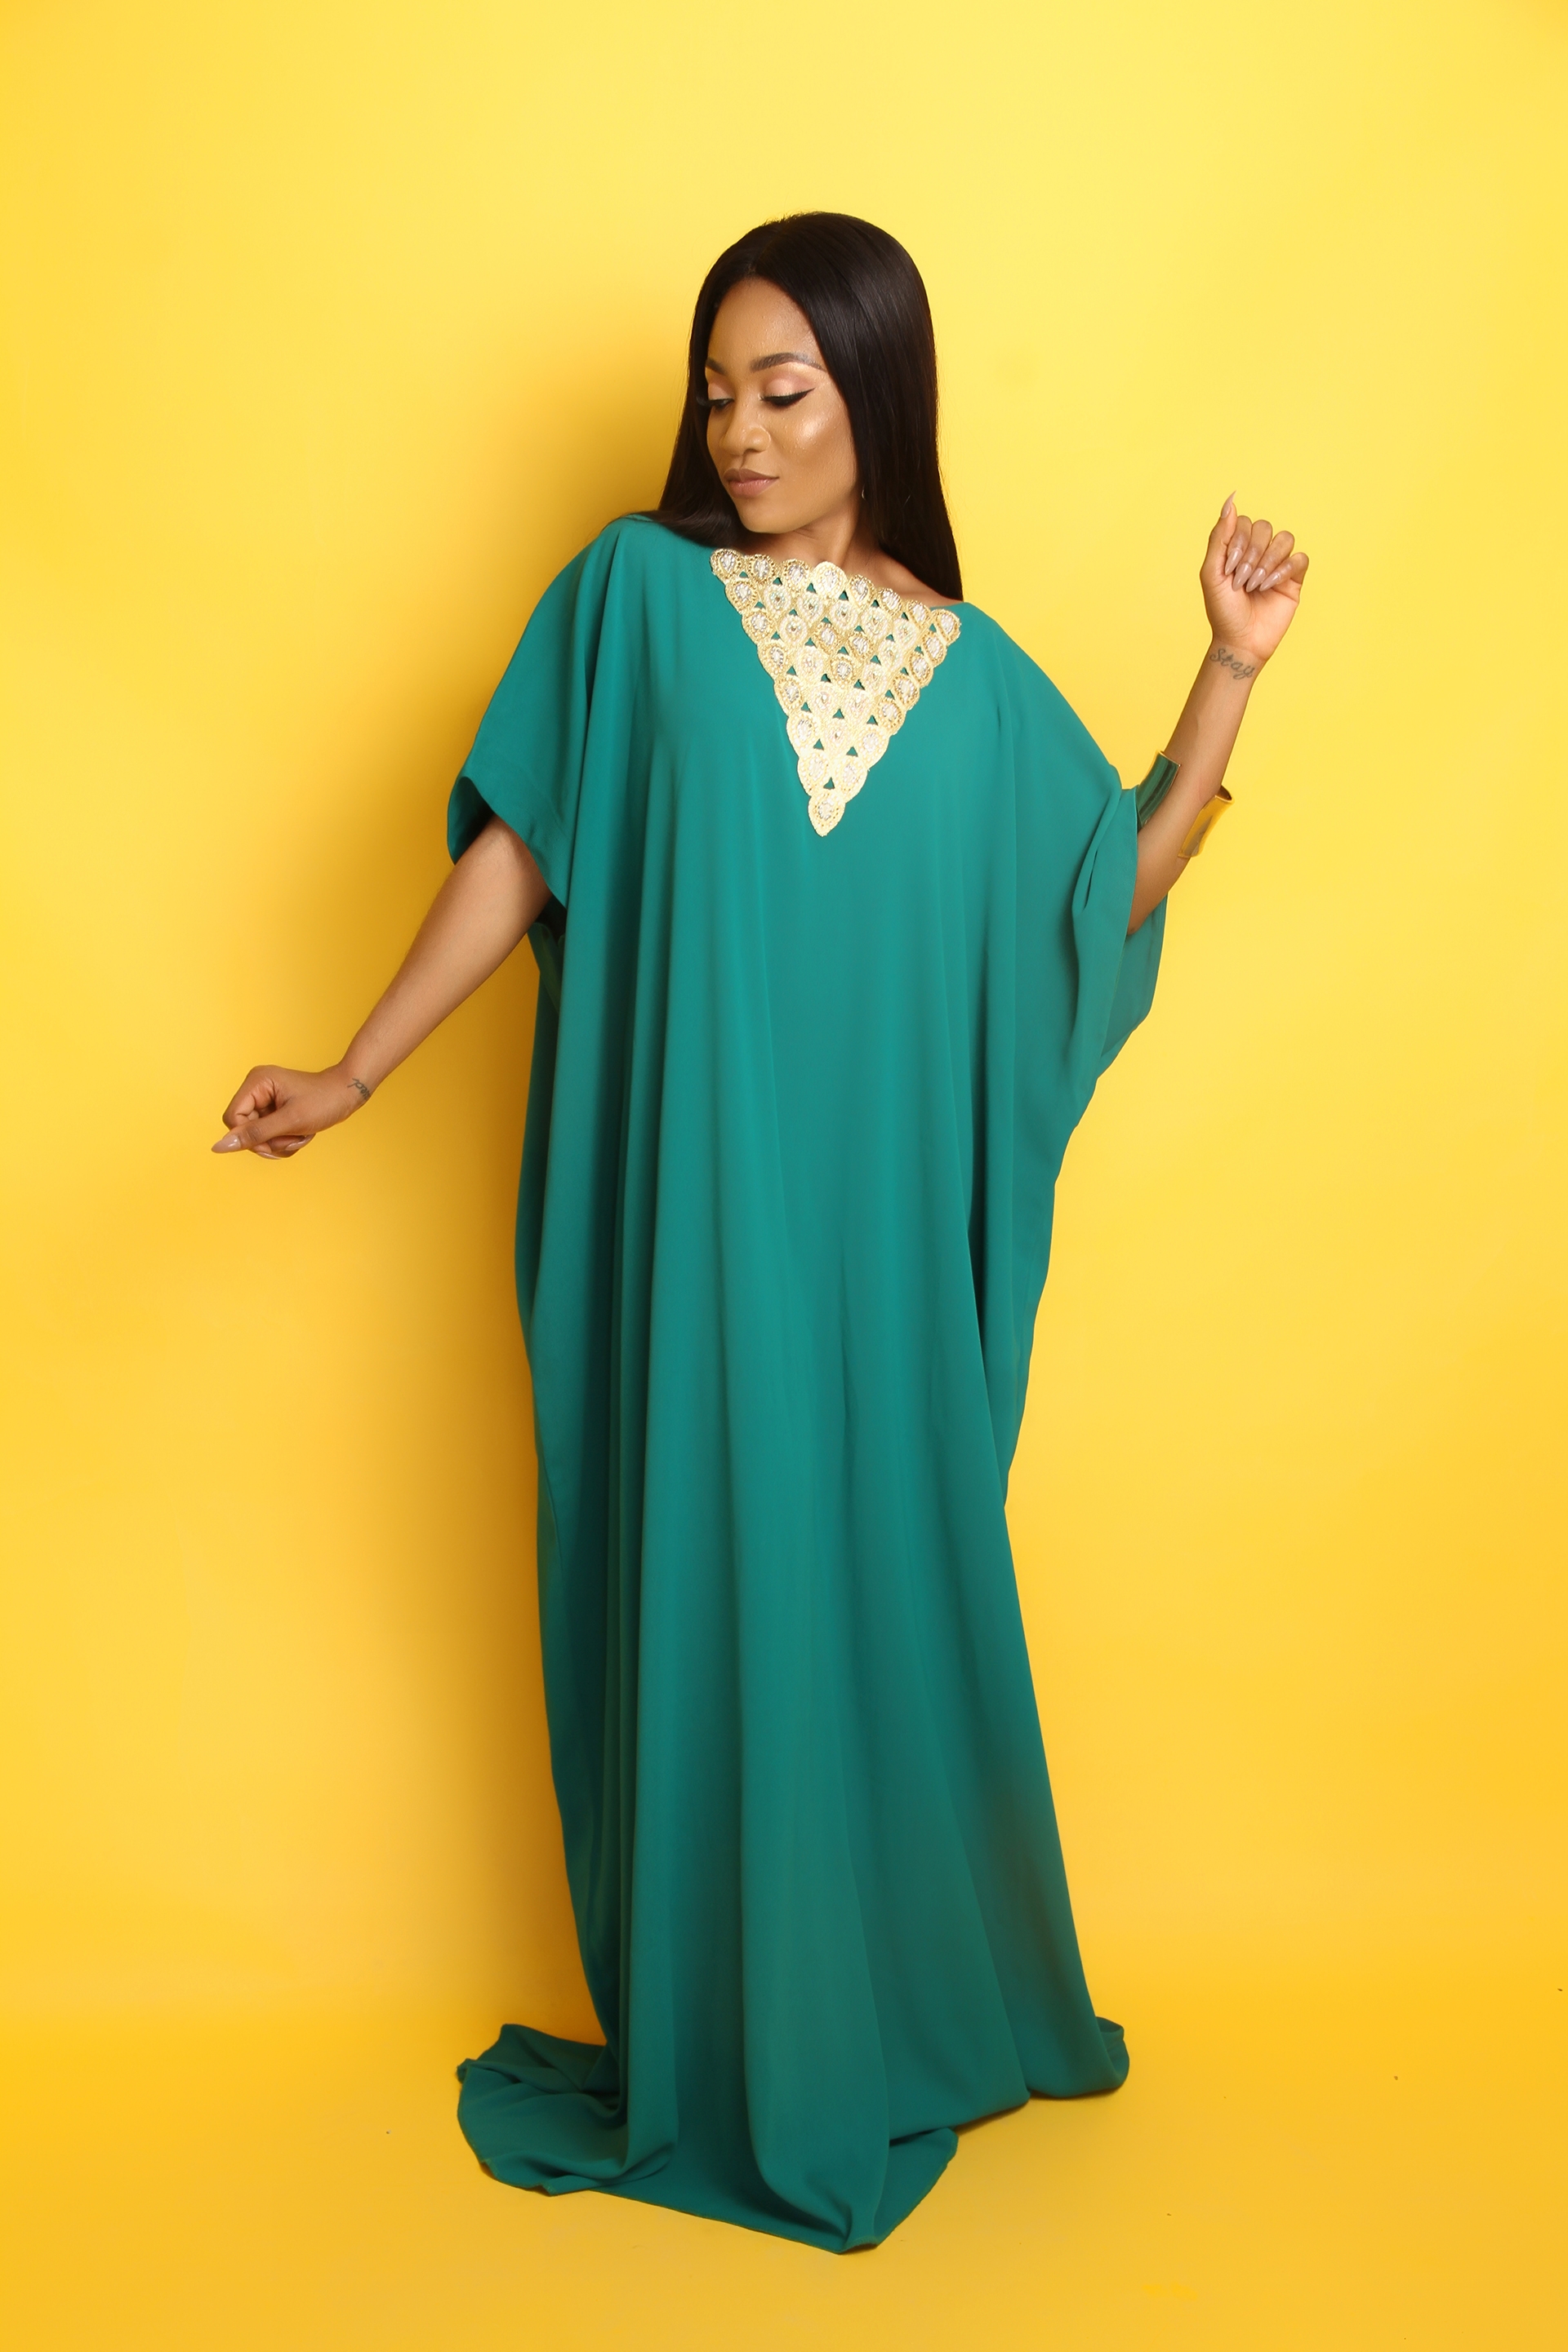 Modern Glamour! Jennifer Oseh for Fashion Brand, Tiattra’s Brand New Collection